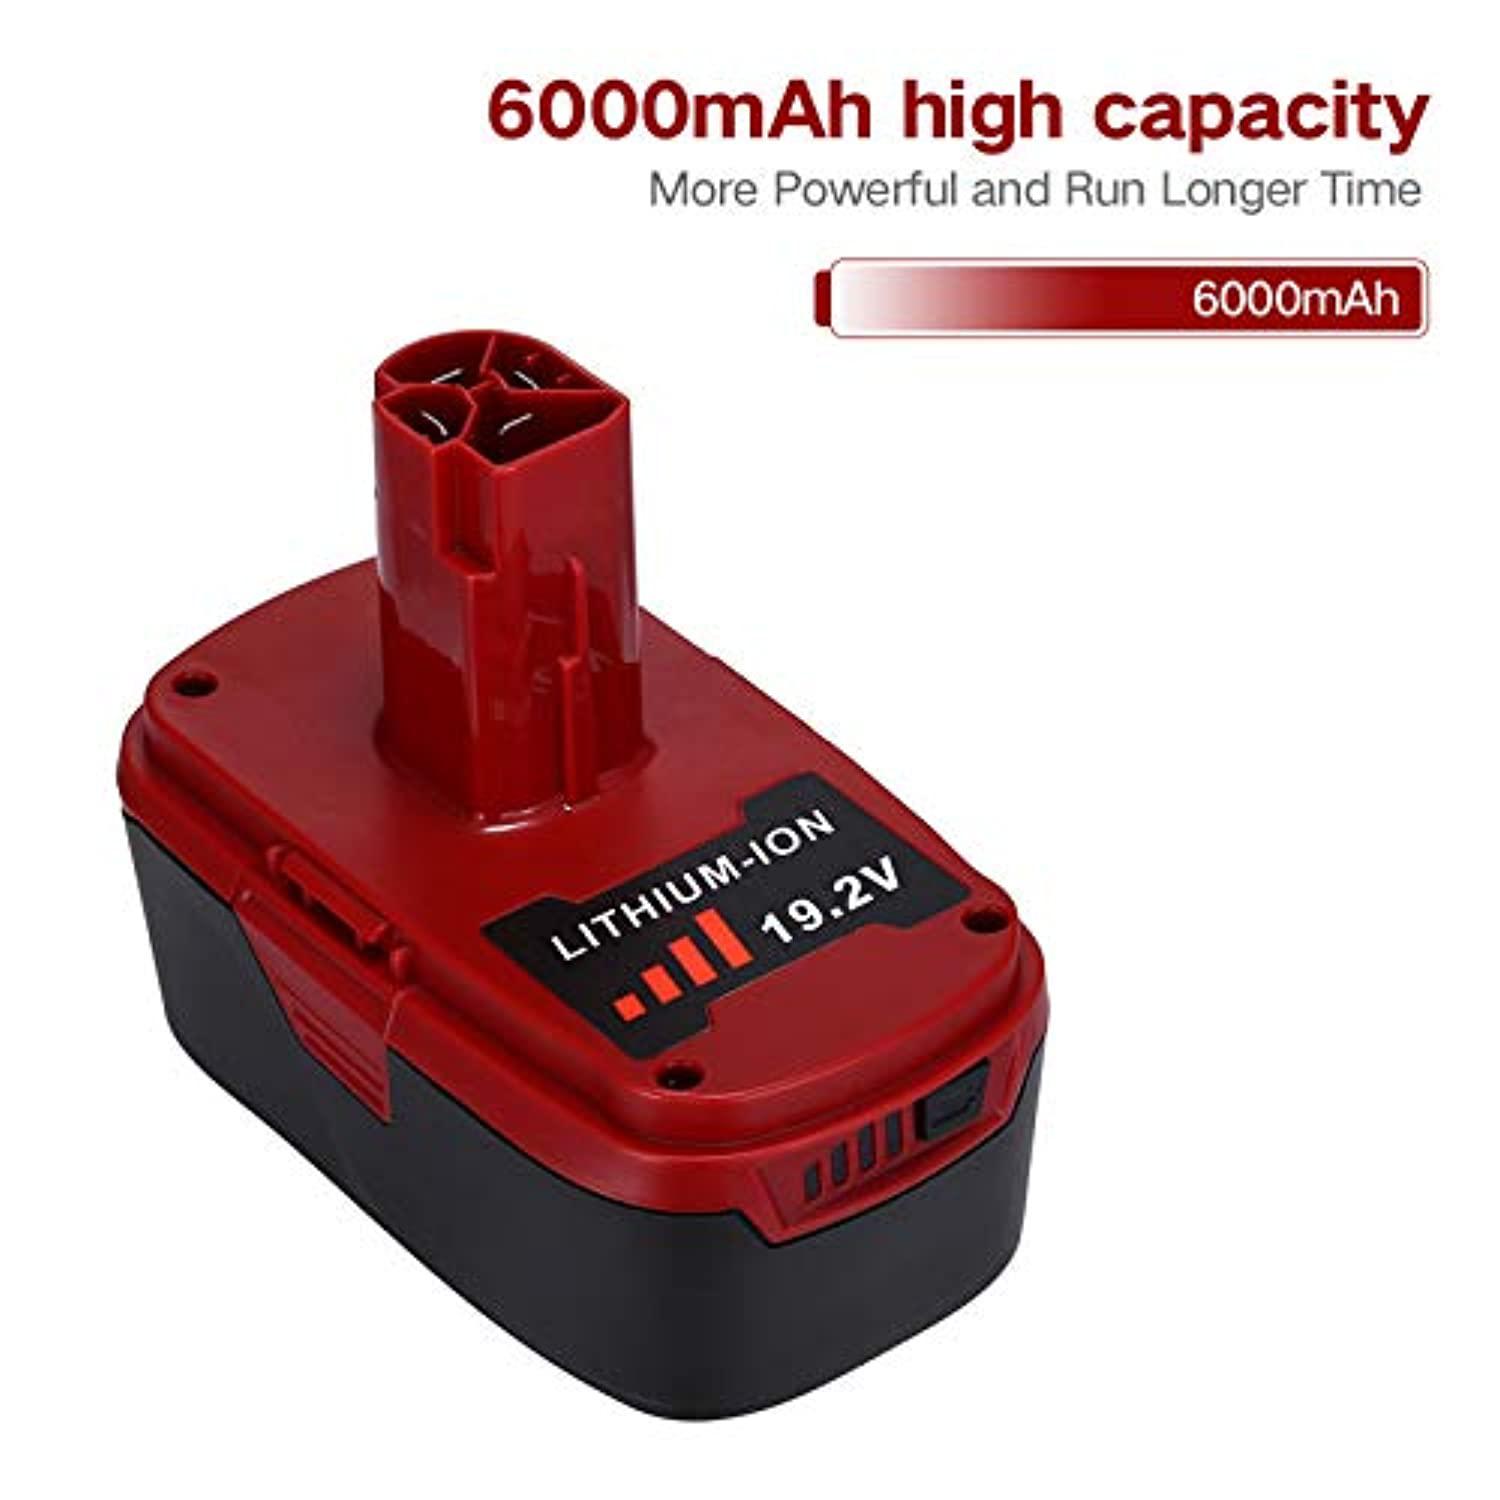 Dosctt 2 packs 6.0ah 19.2v c3 battery compatible with craftsman 19.2 volt battery lithium-ion 130279005 1323903 130211004 11